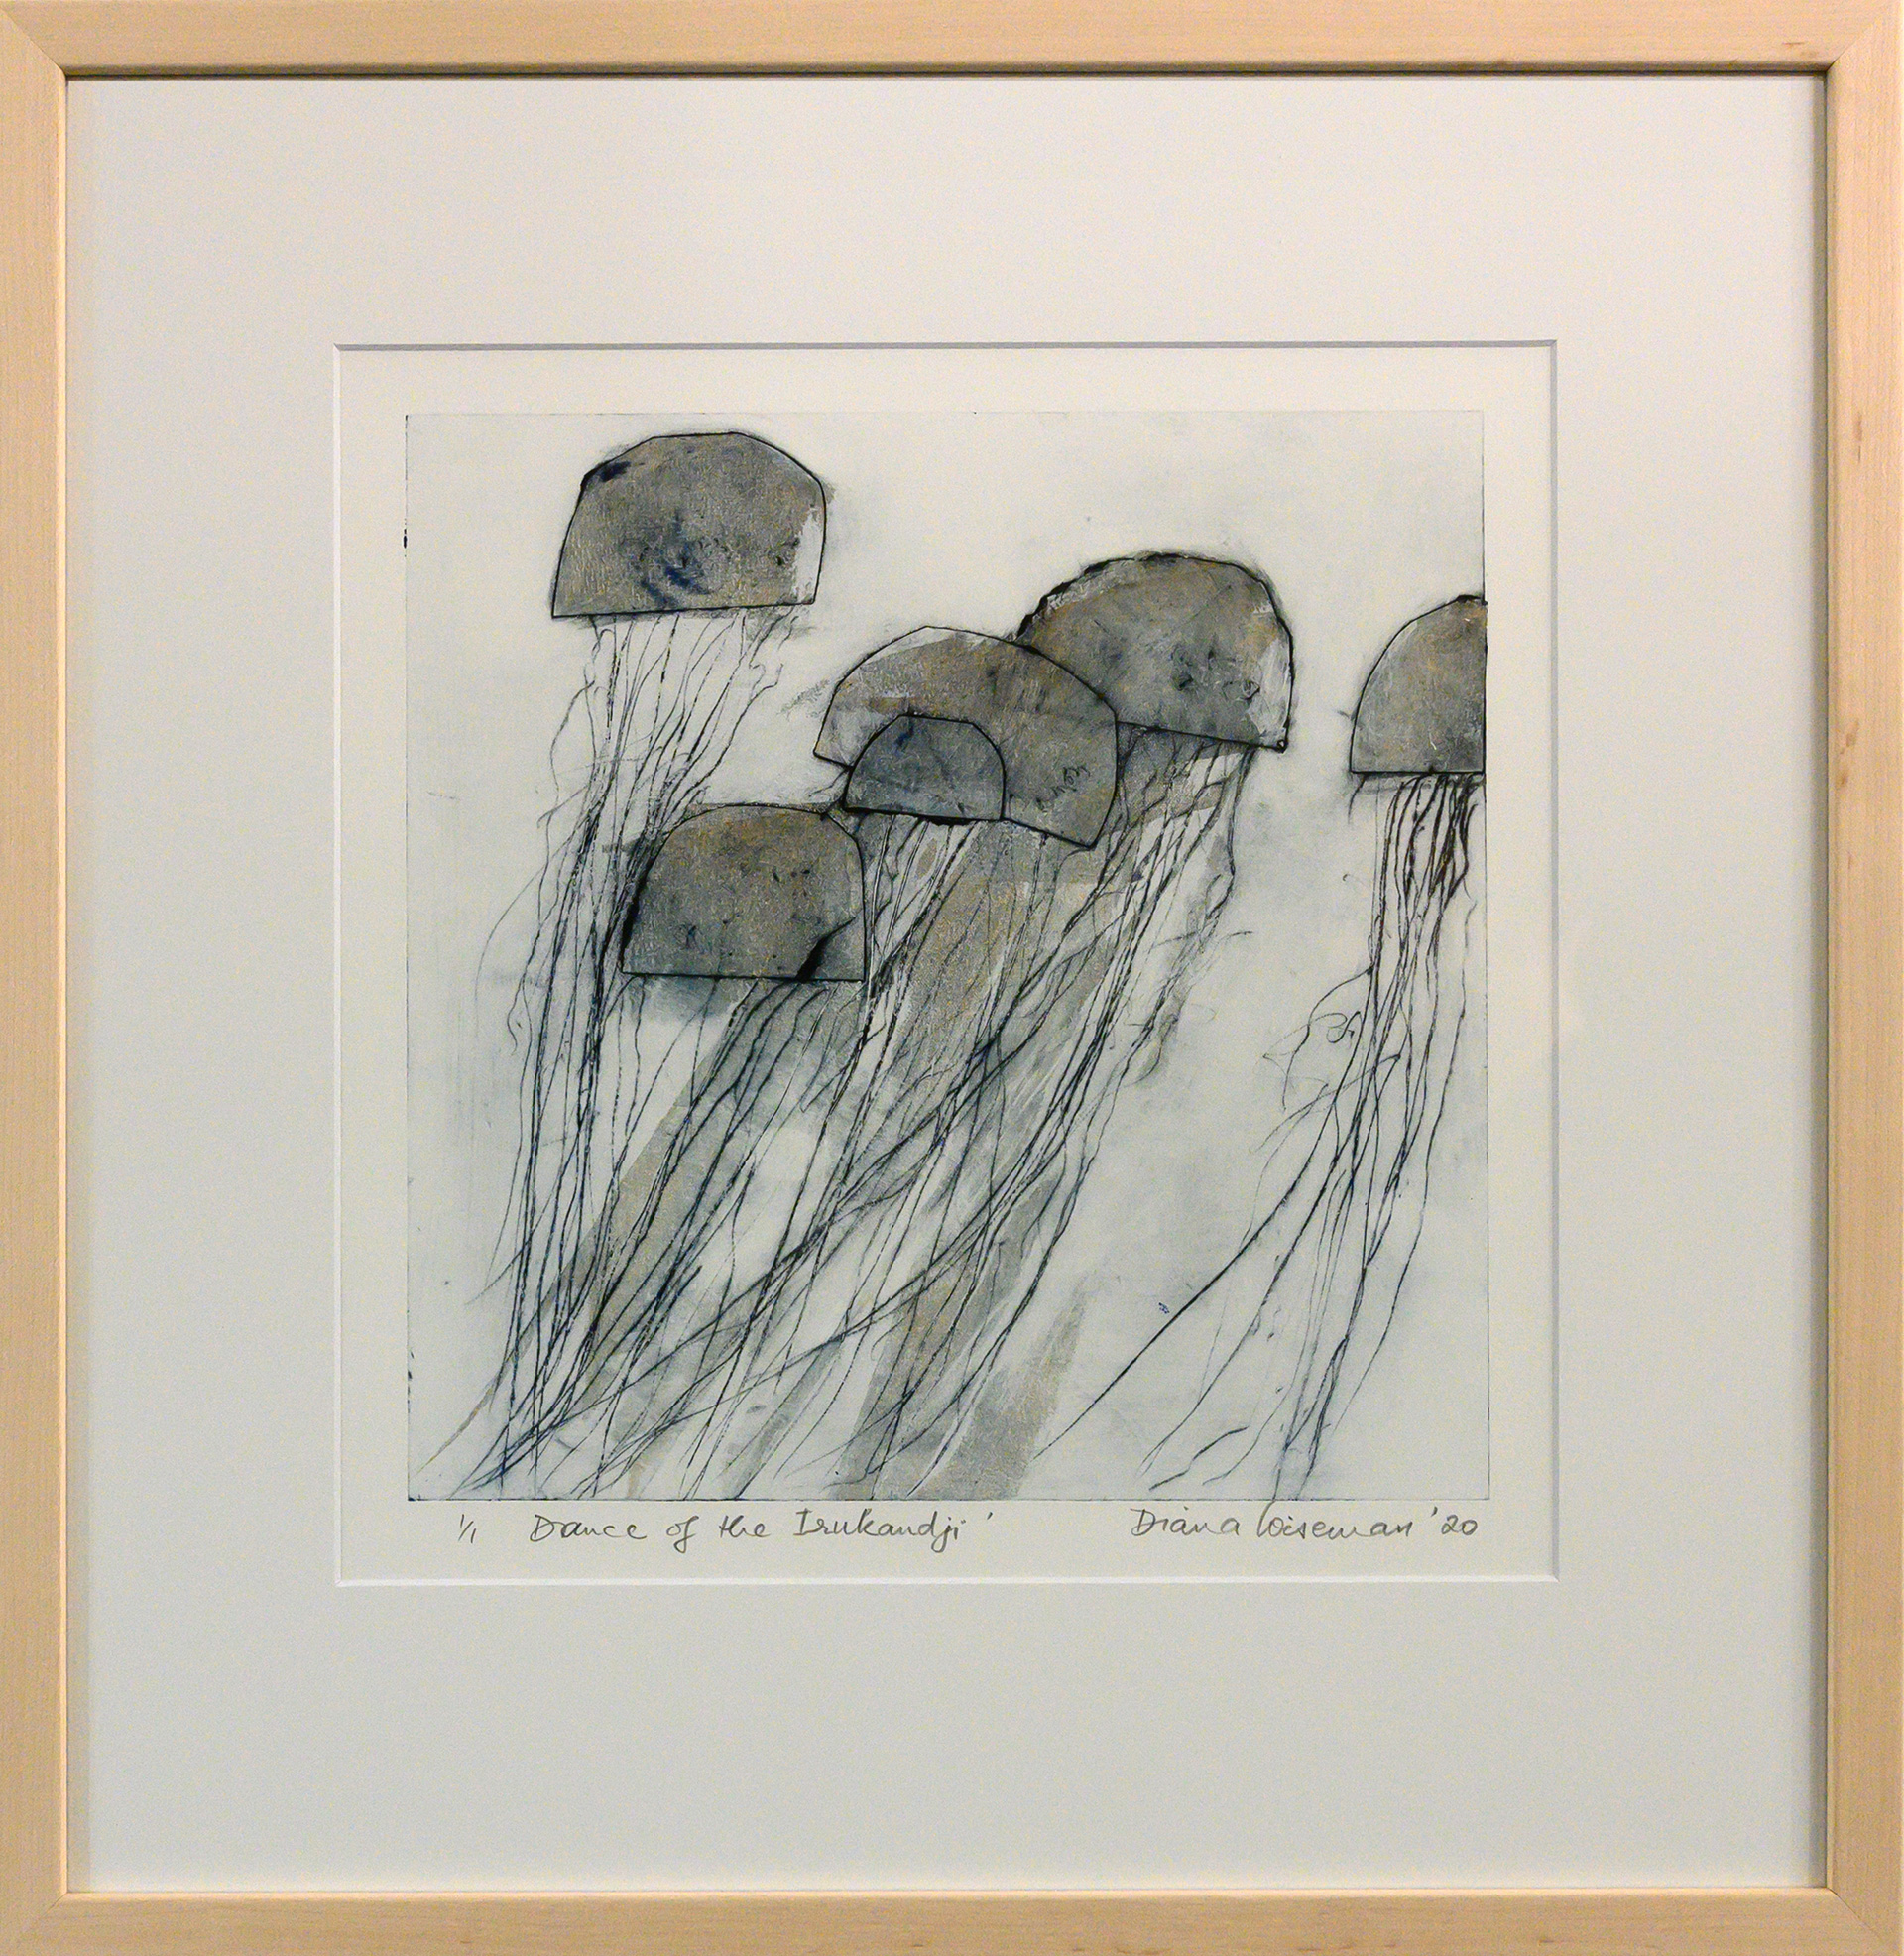 Framed artwork by Diana Wiseman of a group of jellyfish